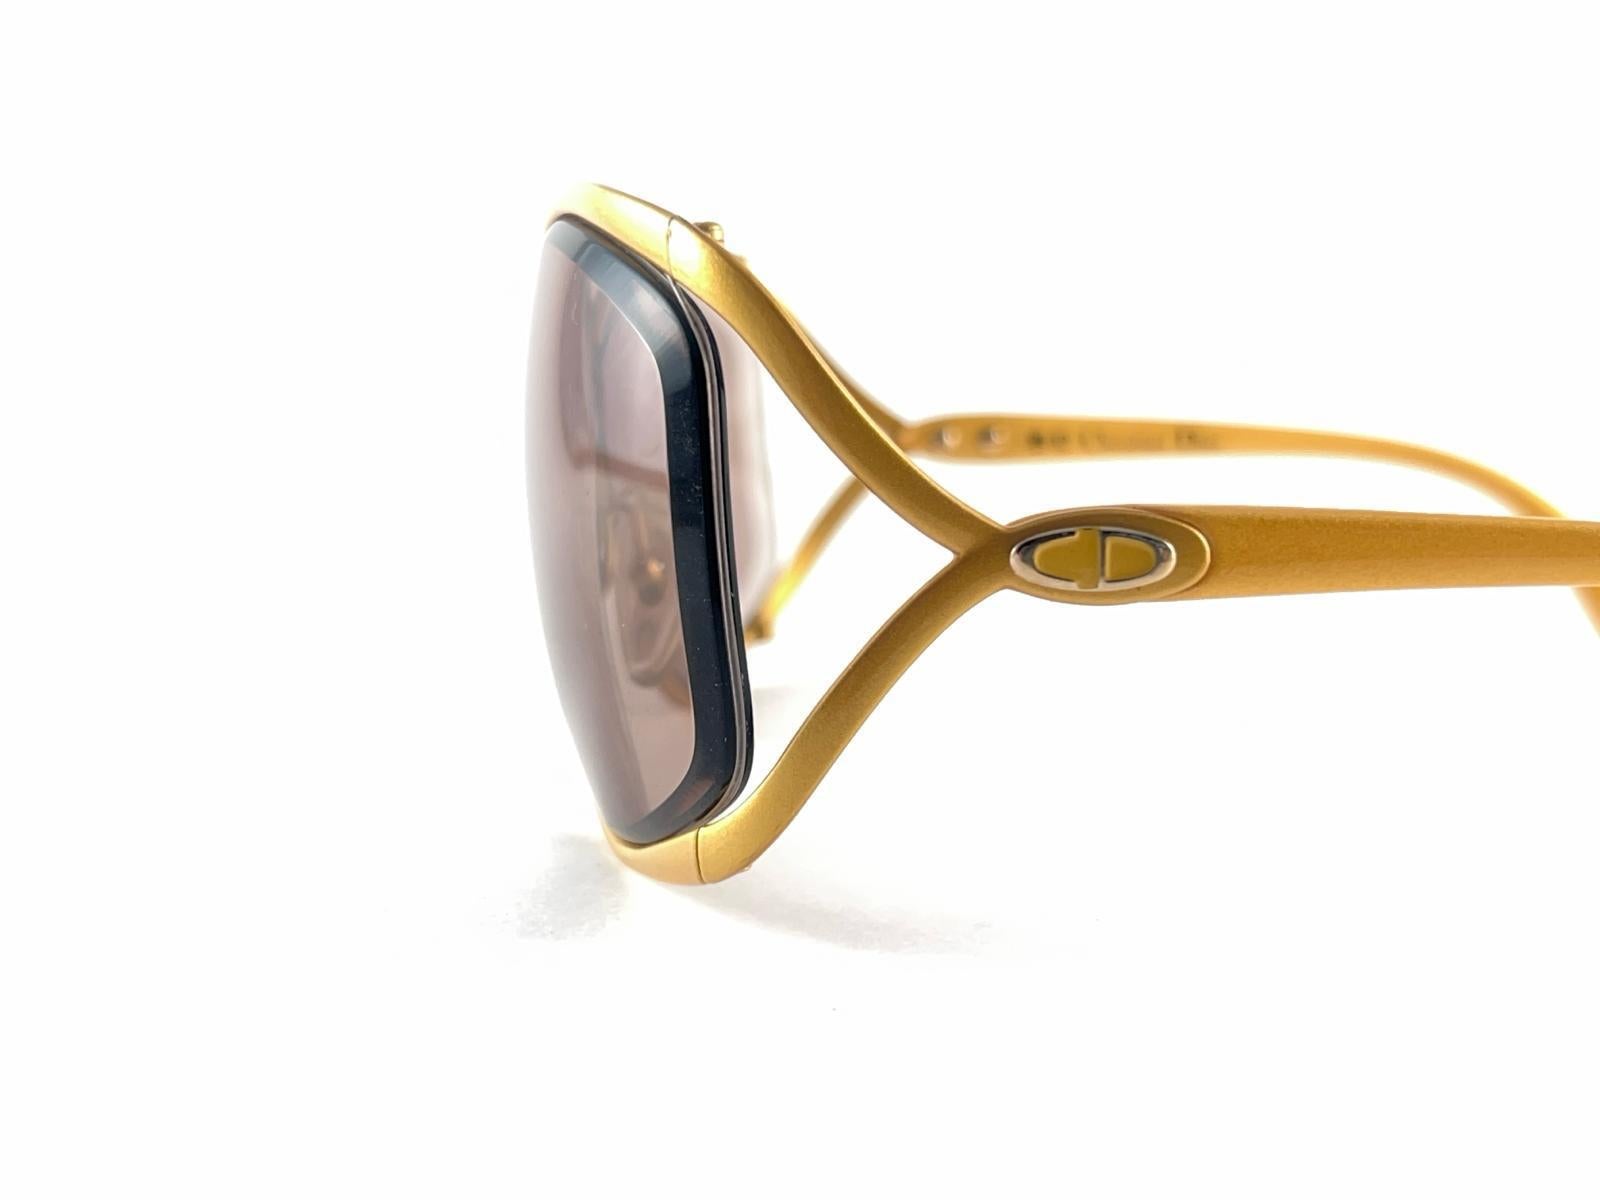 New Vintage Christian Dior 2056 40 Butterfly Mustard Sunglasses Made in Germany For Sale 4